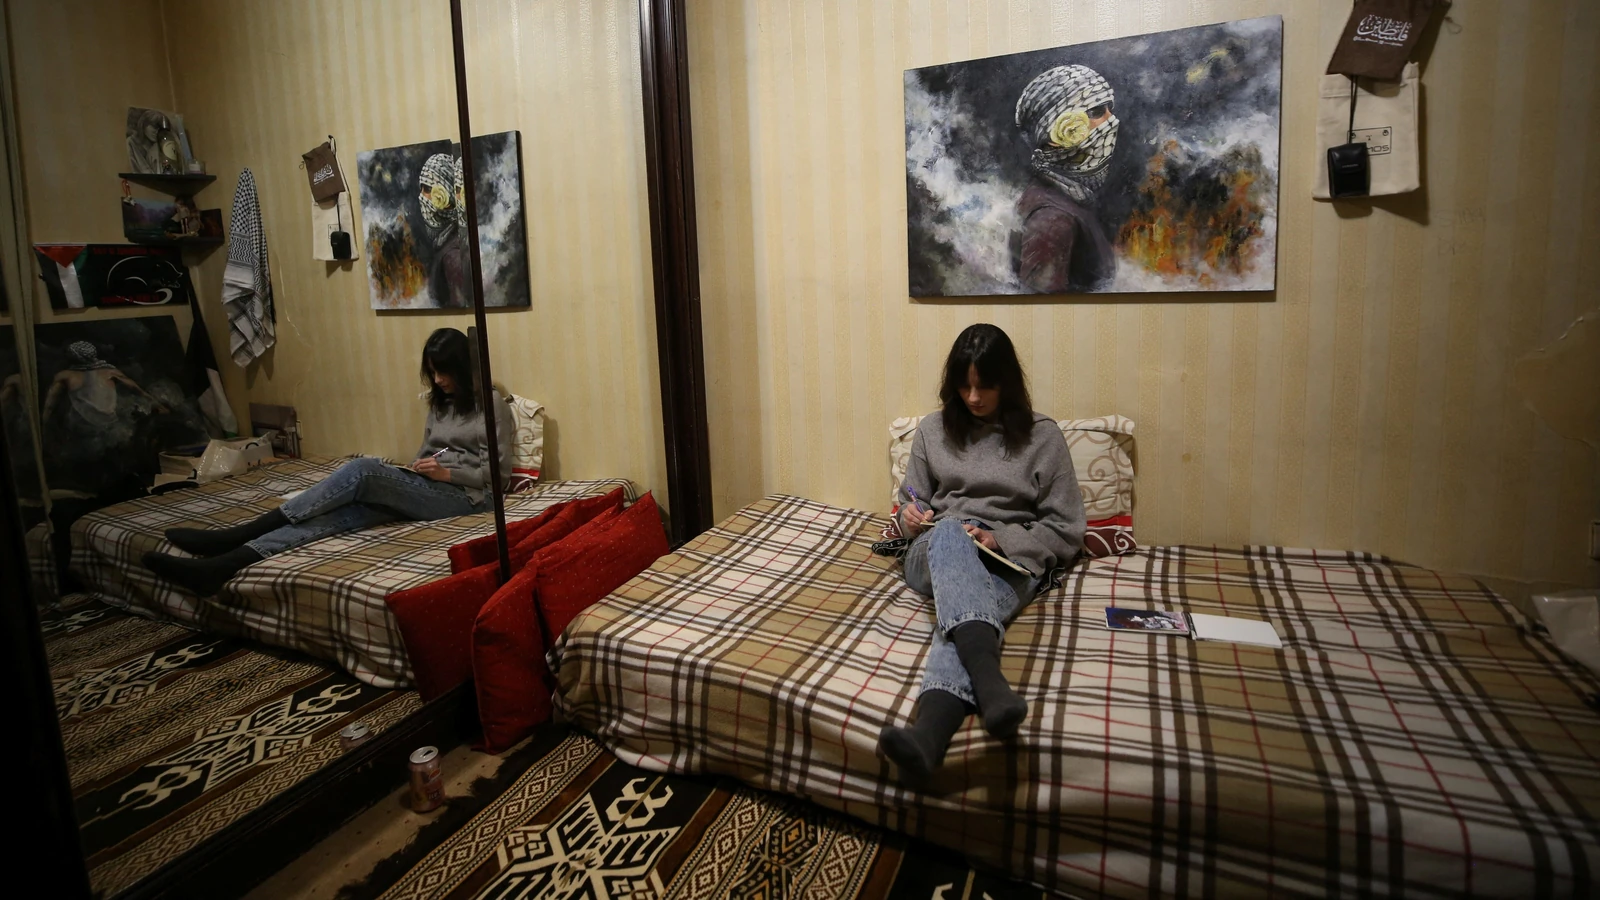 Sandwiched between wars, a Syrian-Ukrainian faces uncertain future